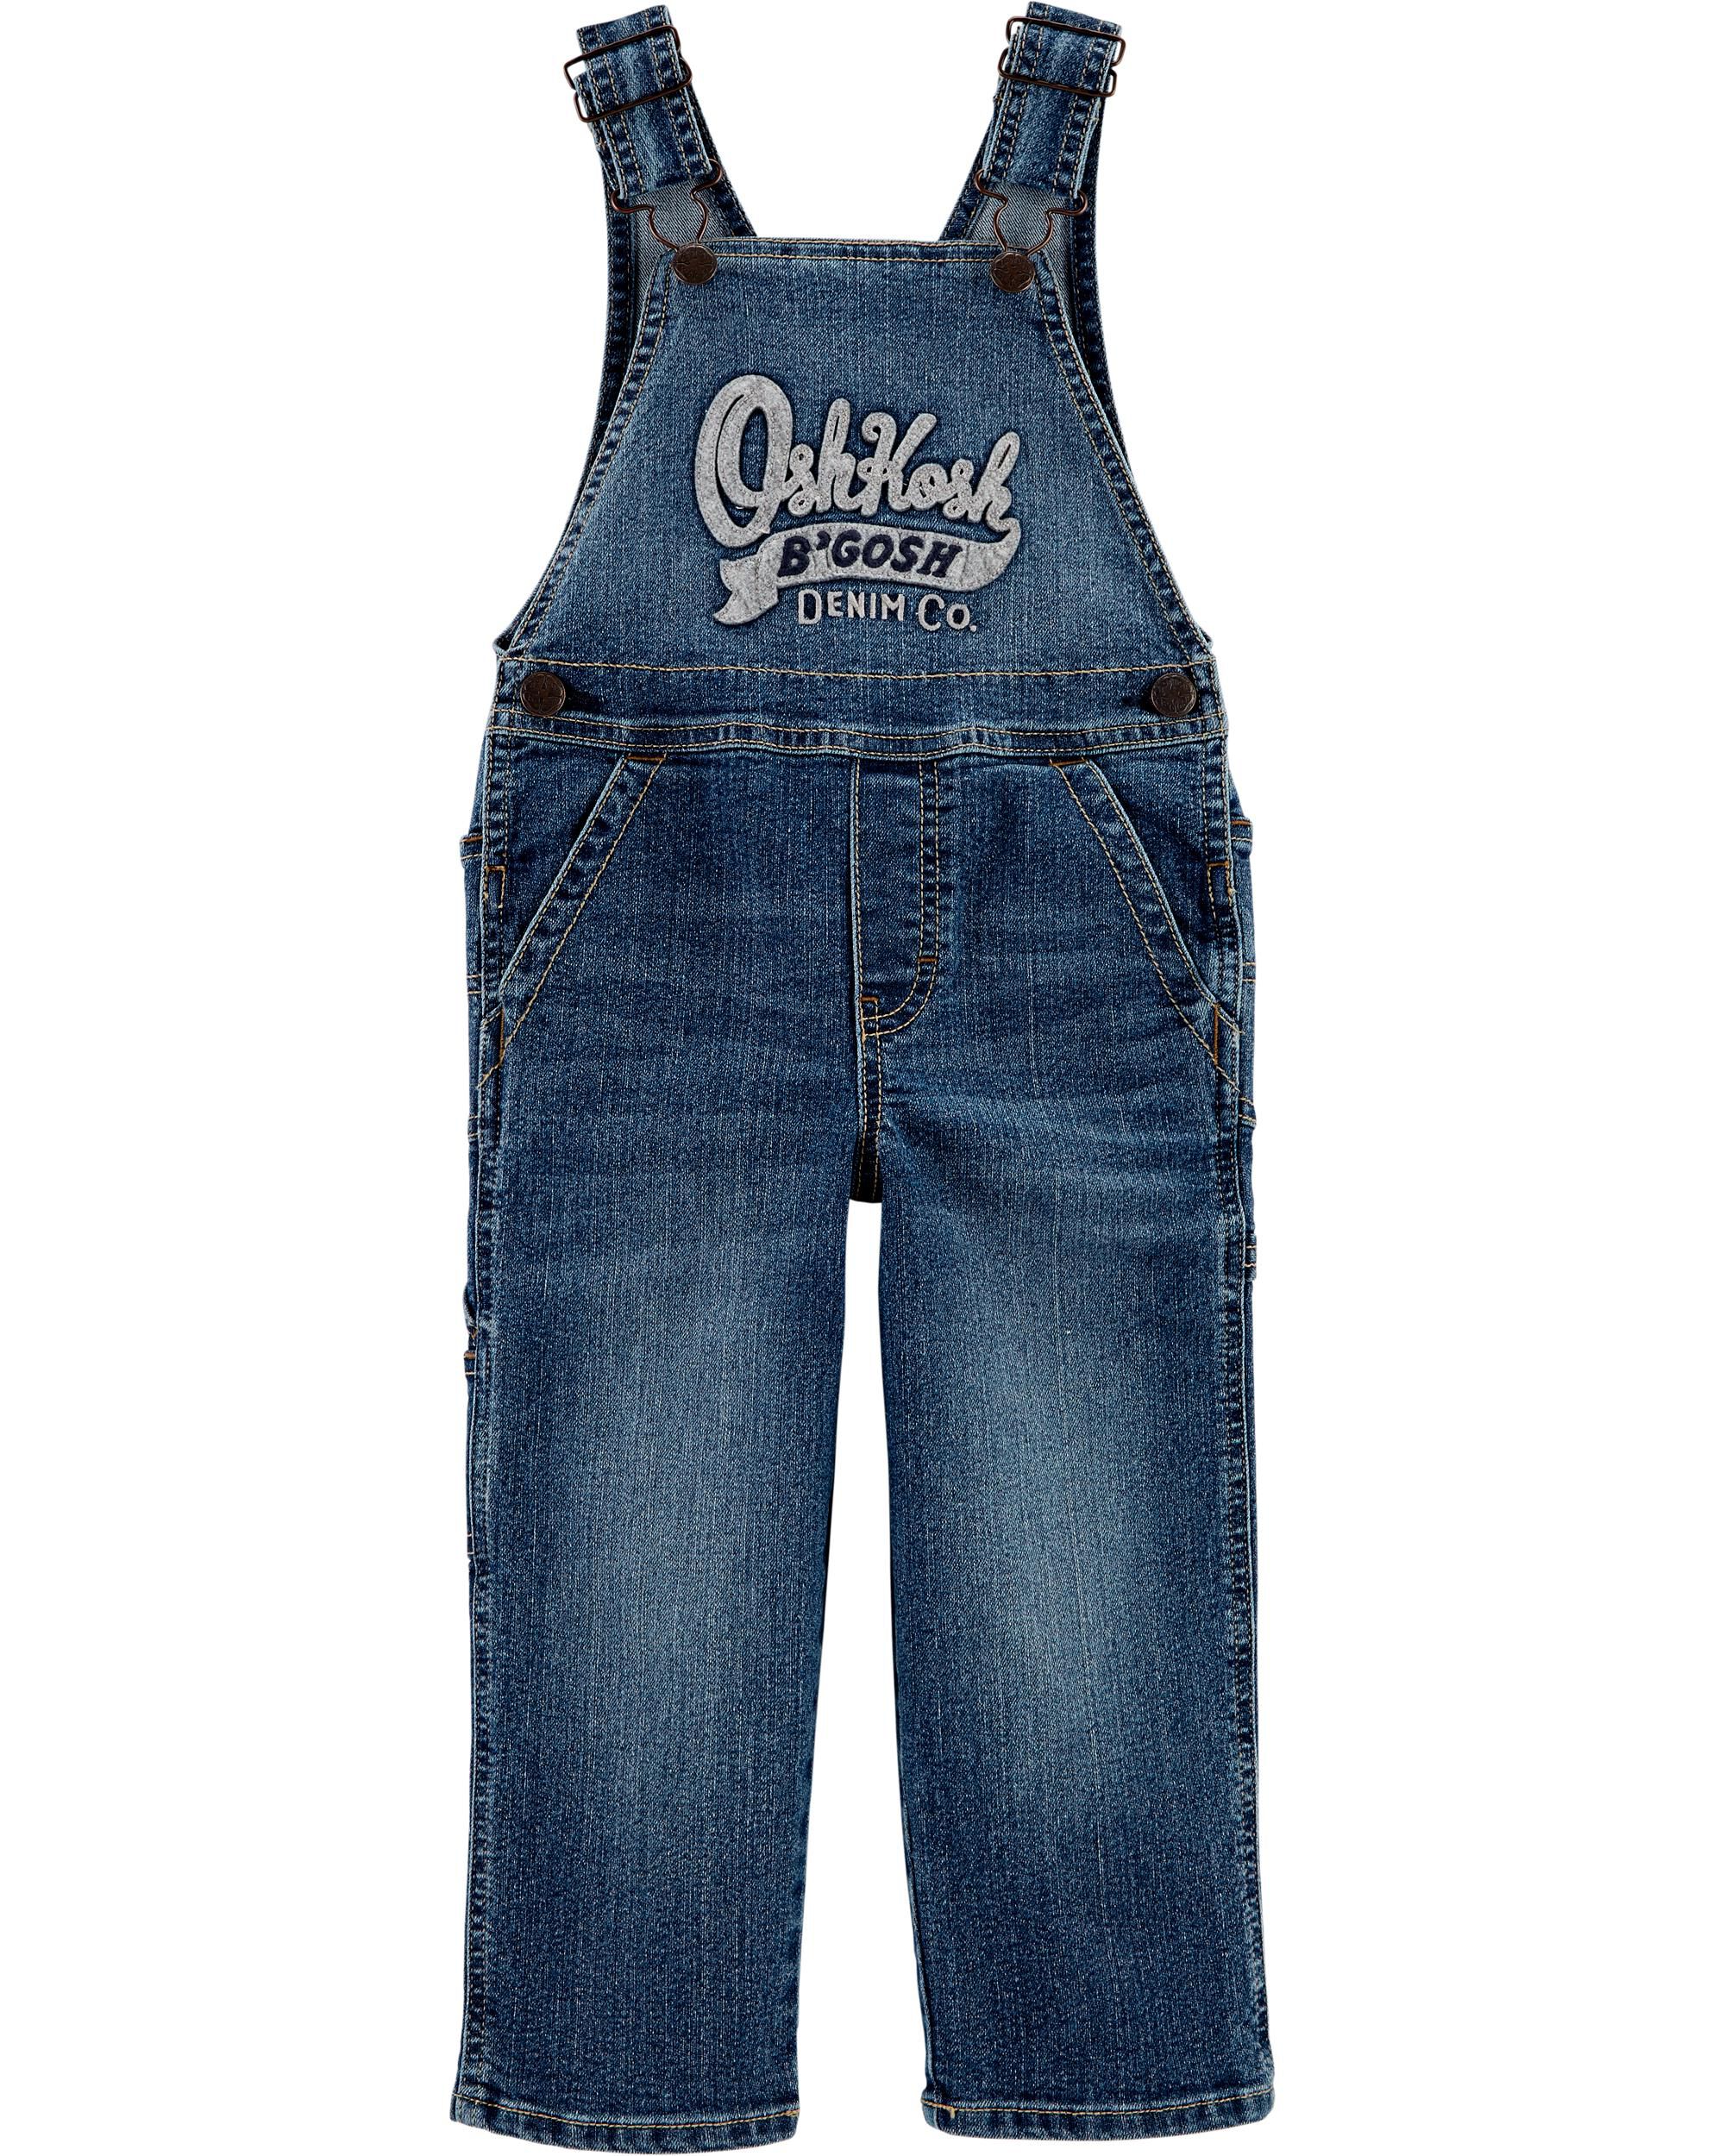 overall shorts kids